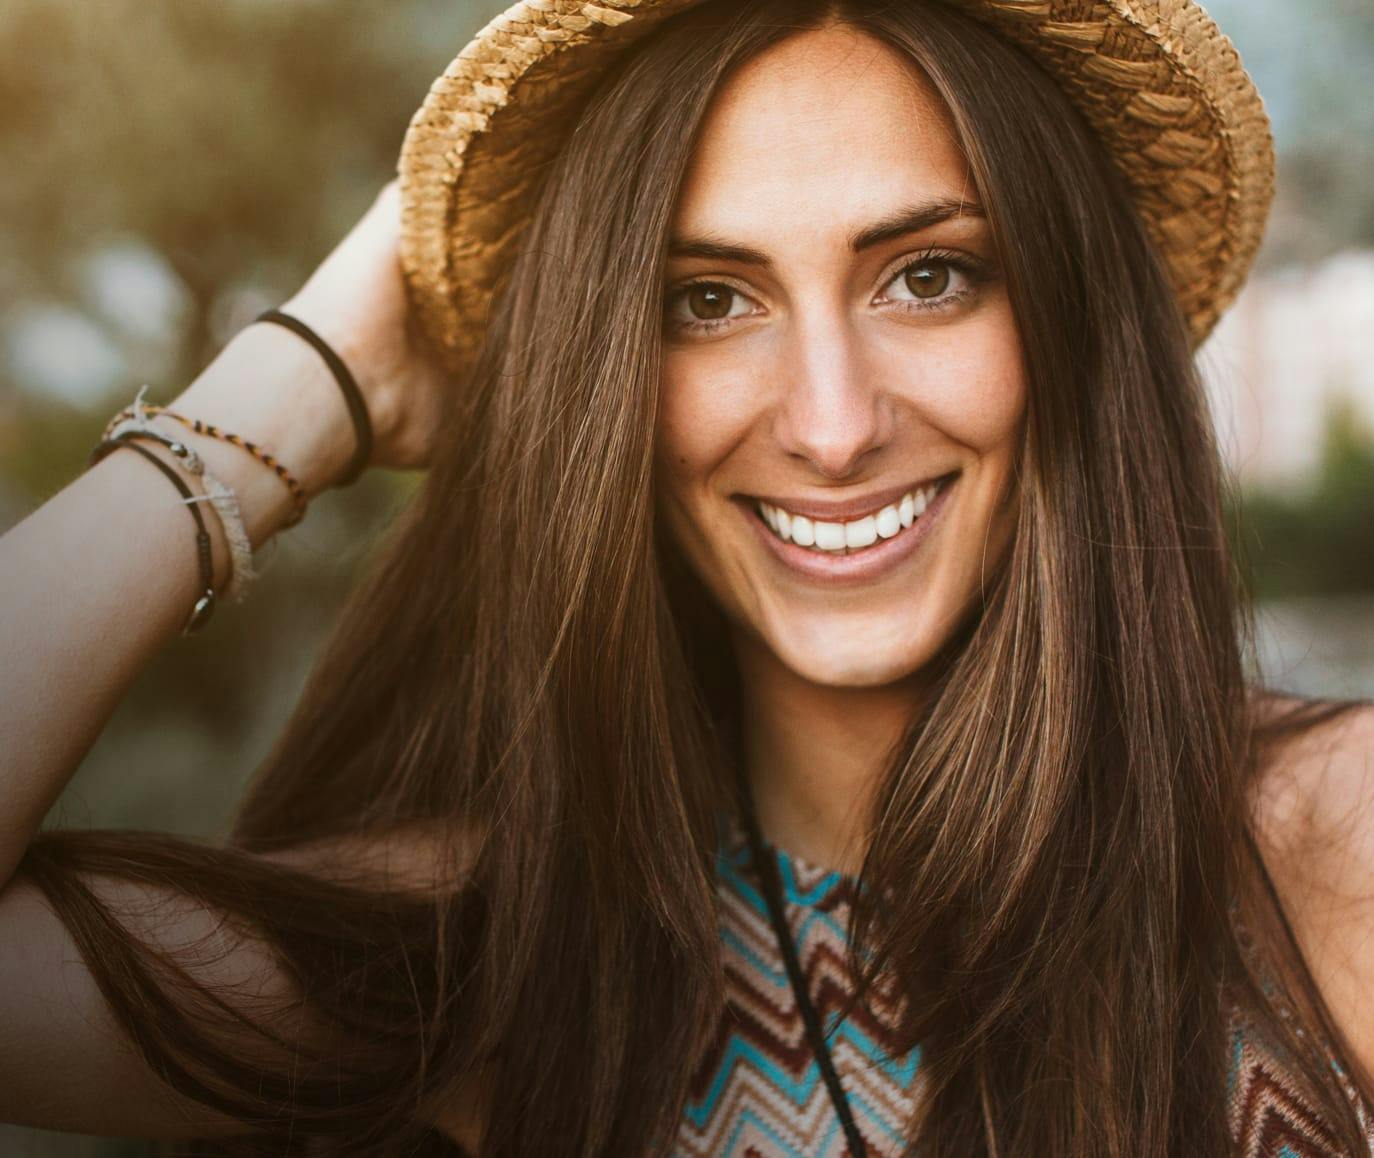 Beautiful woman with long, straight, brown hair, wearing a hat and smiling into the camera.